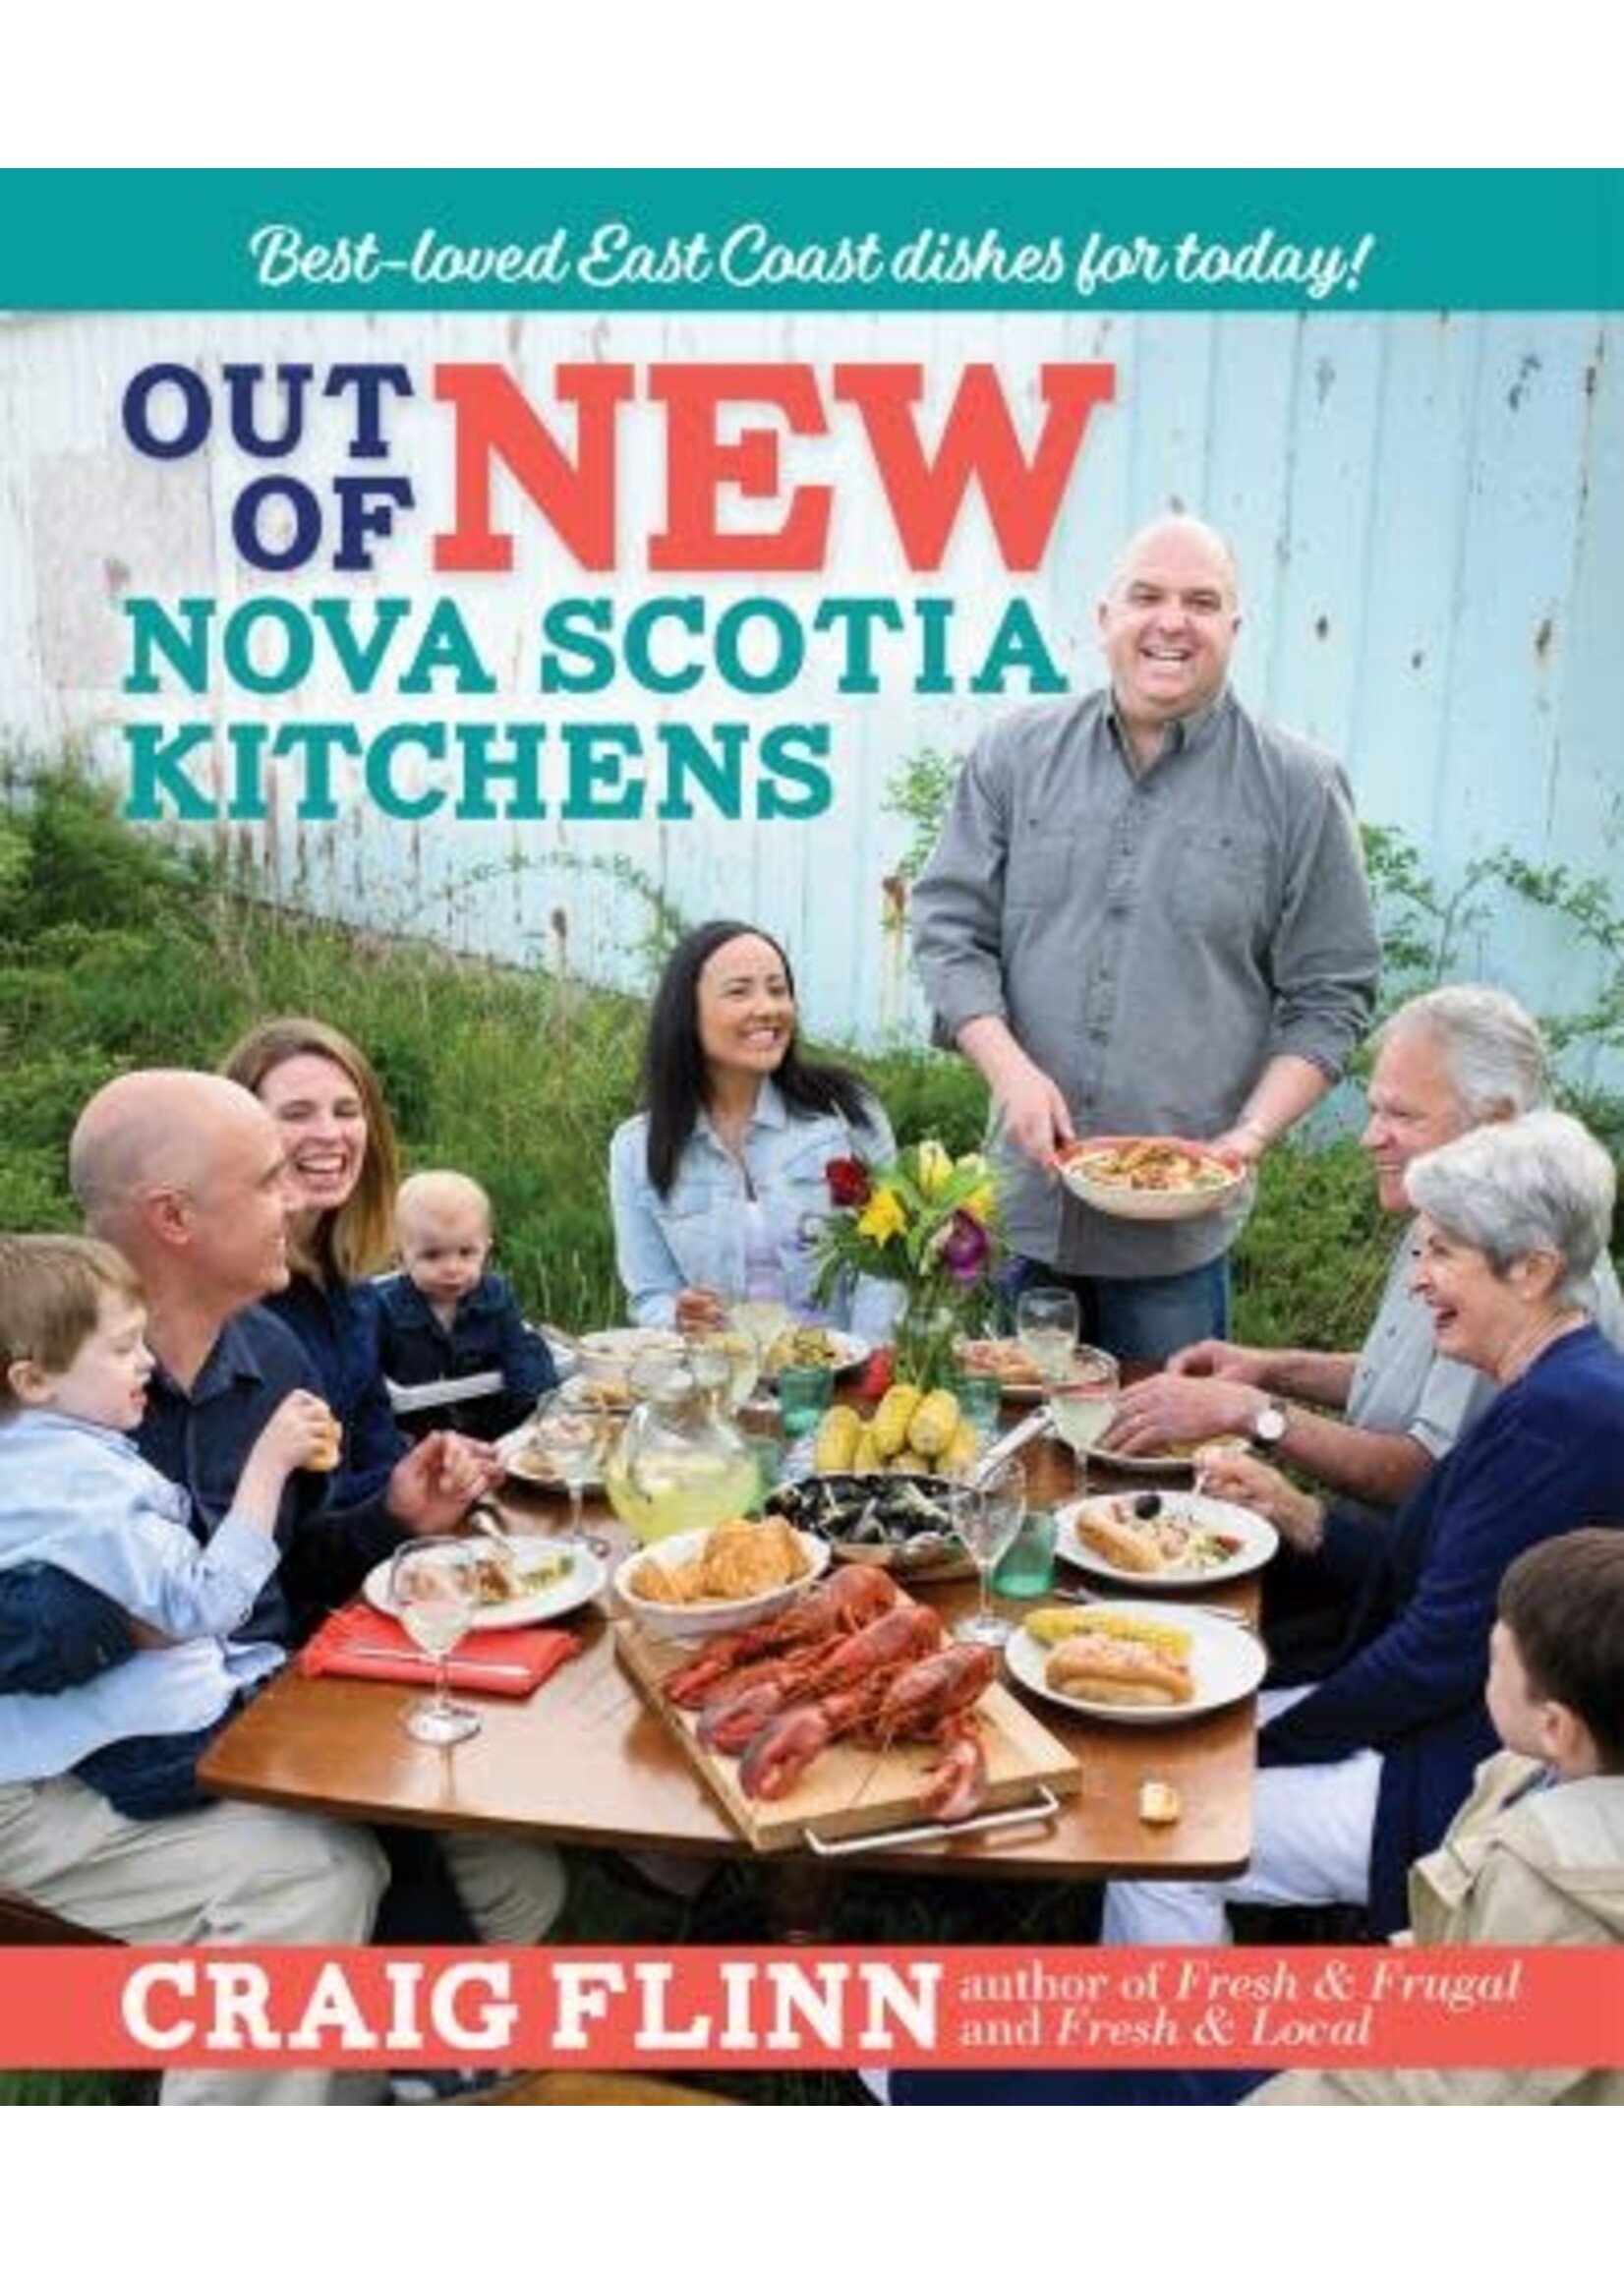 Out of New Nova Scotia Kitchens: Best-loved East Coast Dishes for Today by Craig Flinn